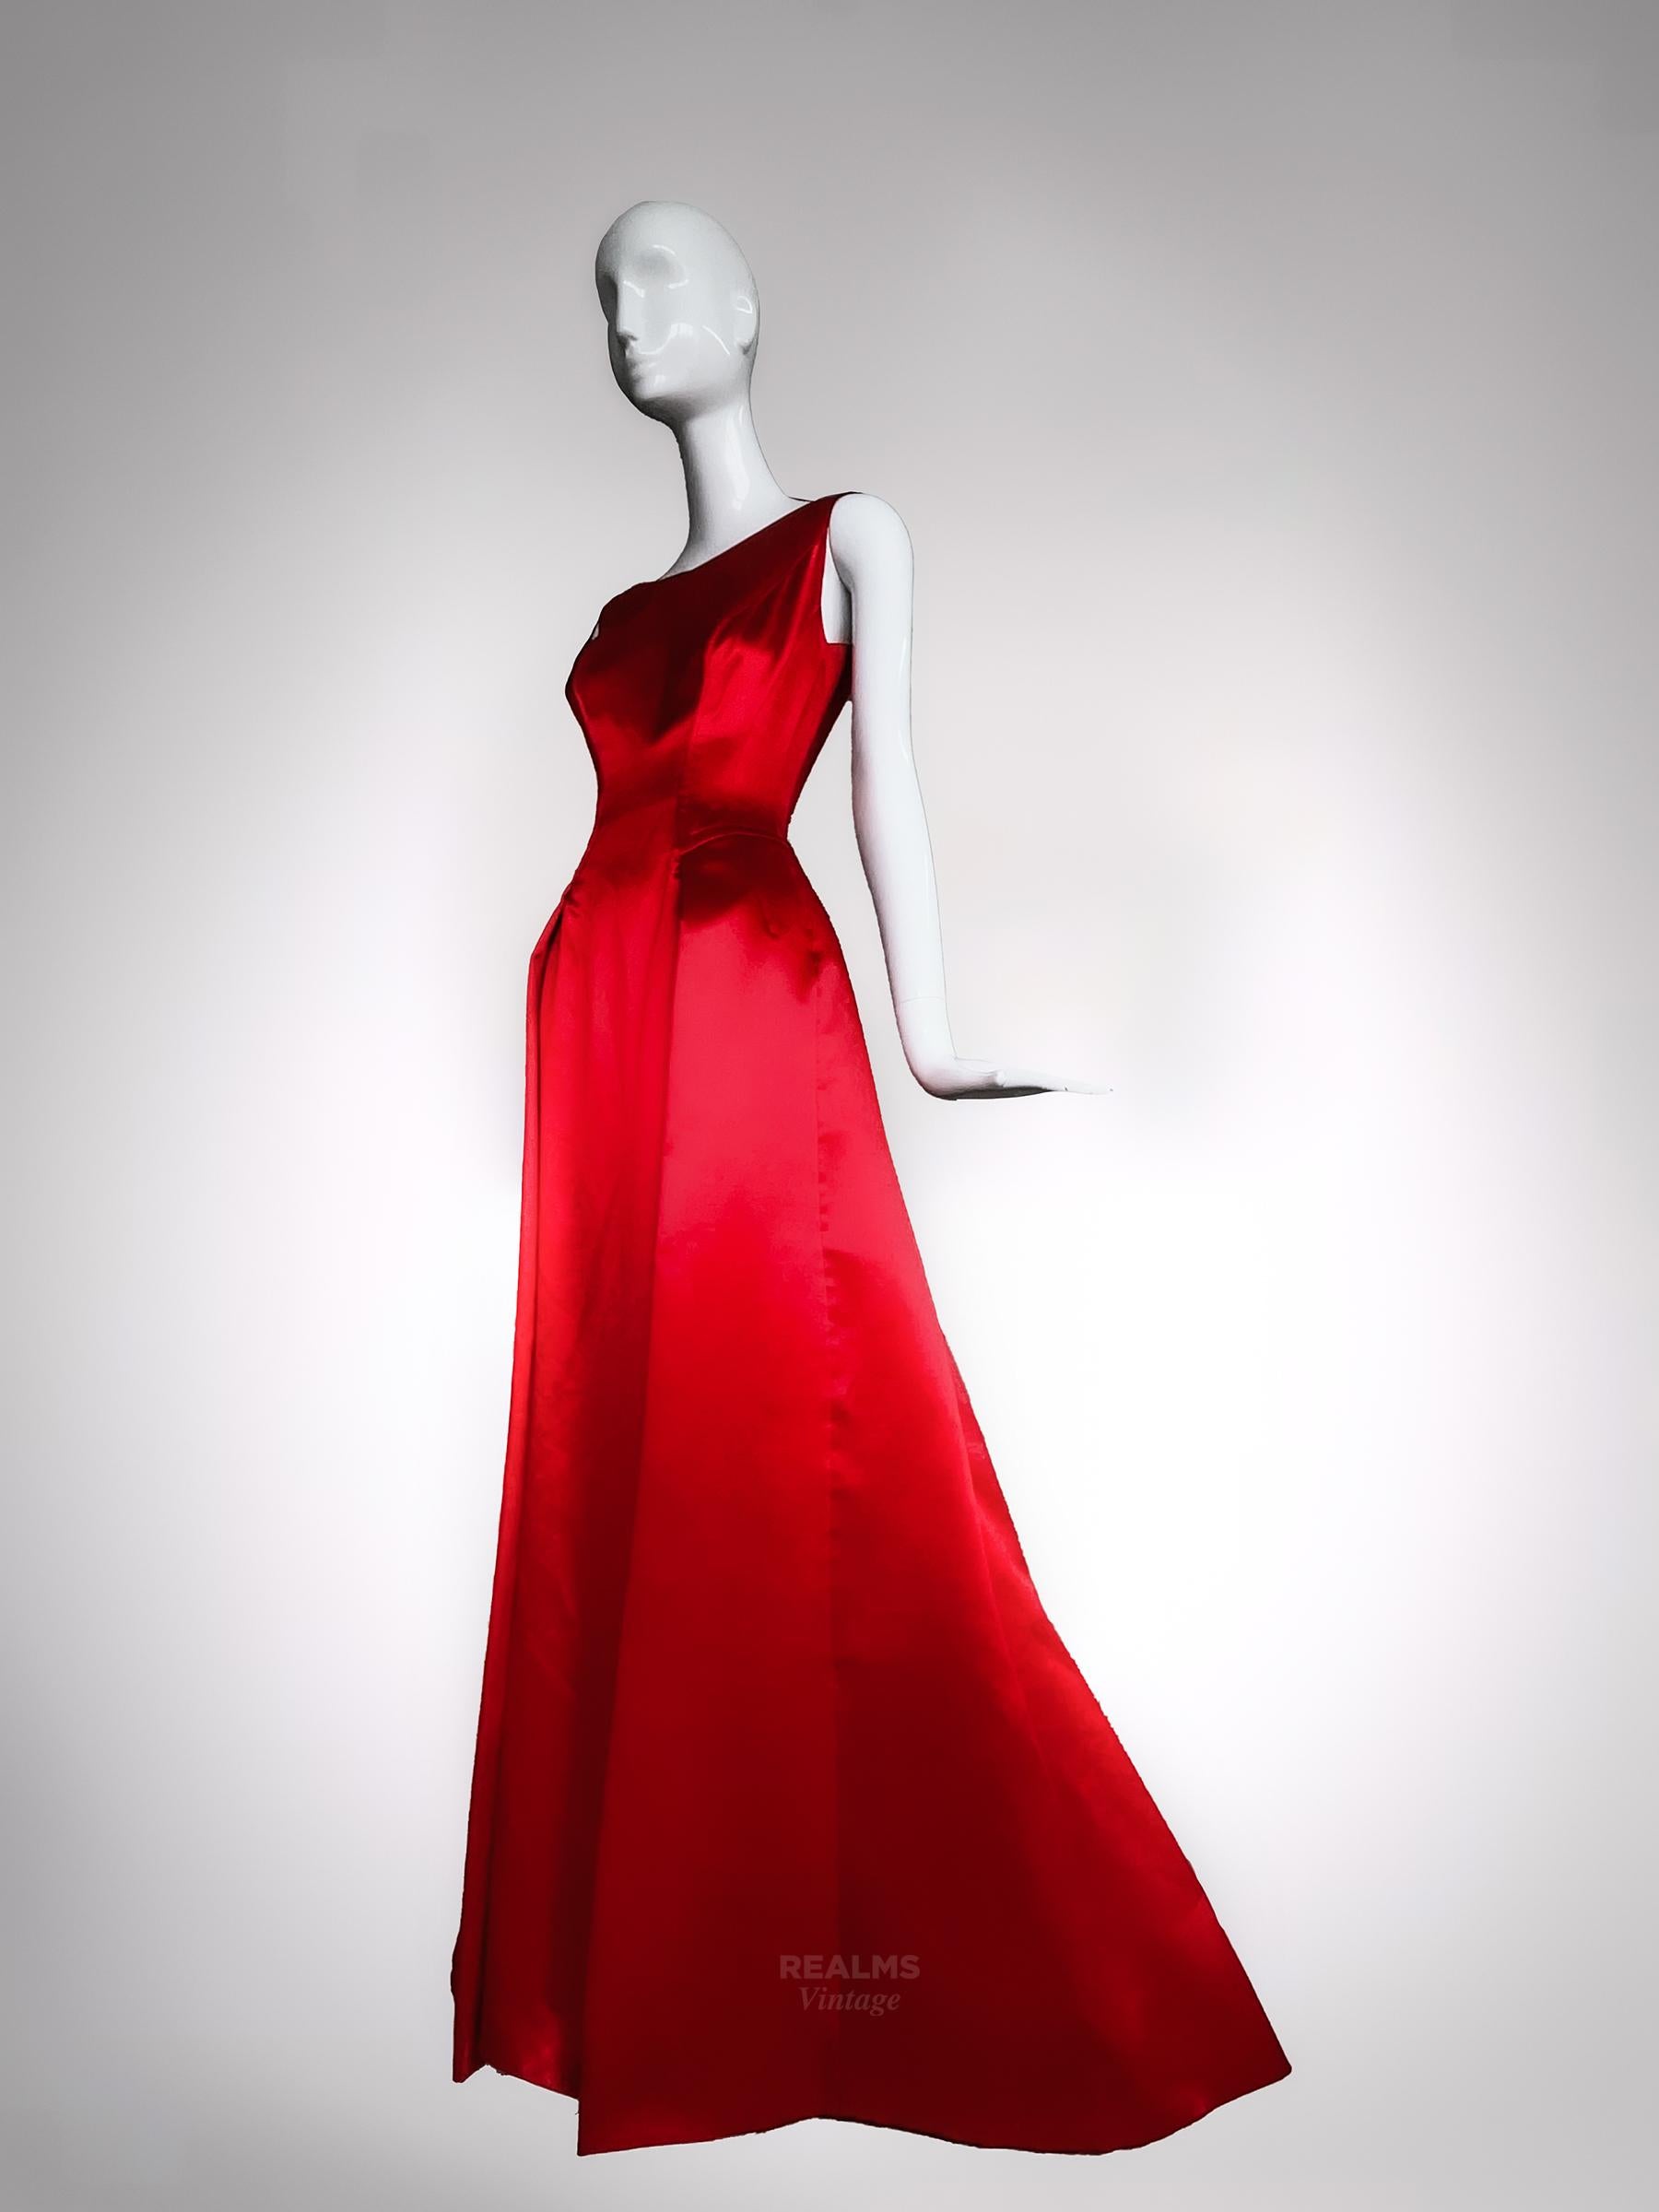 Breathtaking Thierry Mugler Couture Goddess Evening Gown 
Assuming Fall Winter 1999 Collection

The most stunning Thierry Mugler evening gown. Vibrant red made of gorgeous glowing Silk. Beautiful open V décolleté, bustier-like tailored bodice